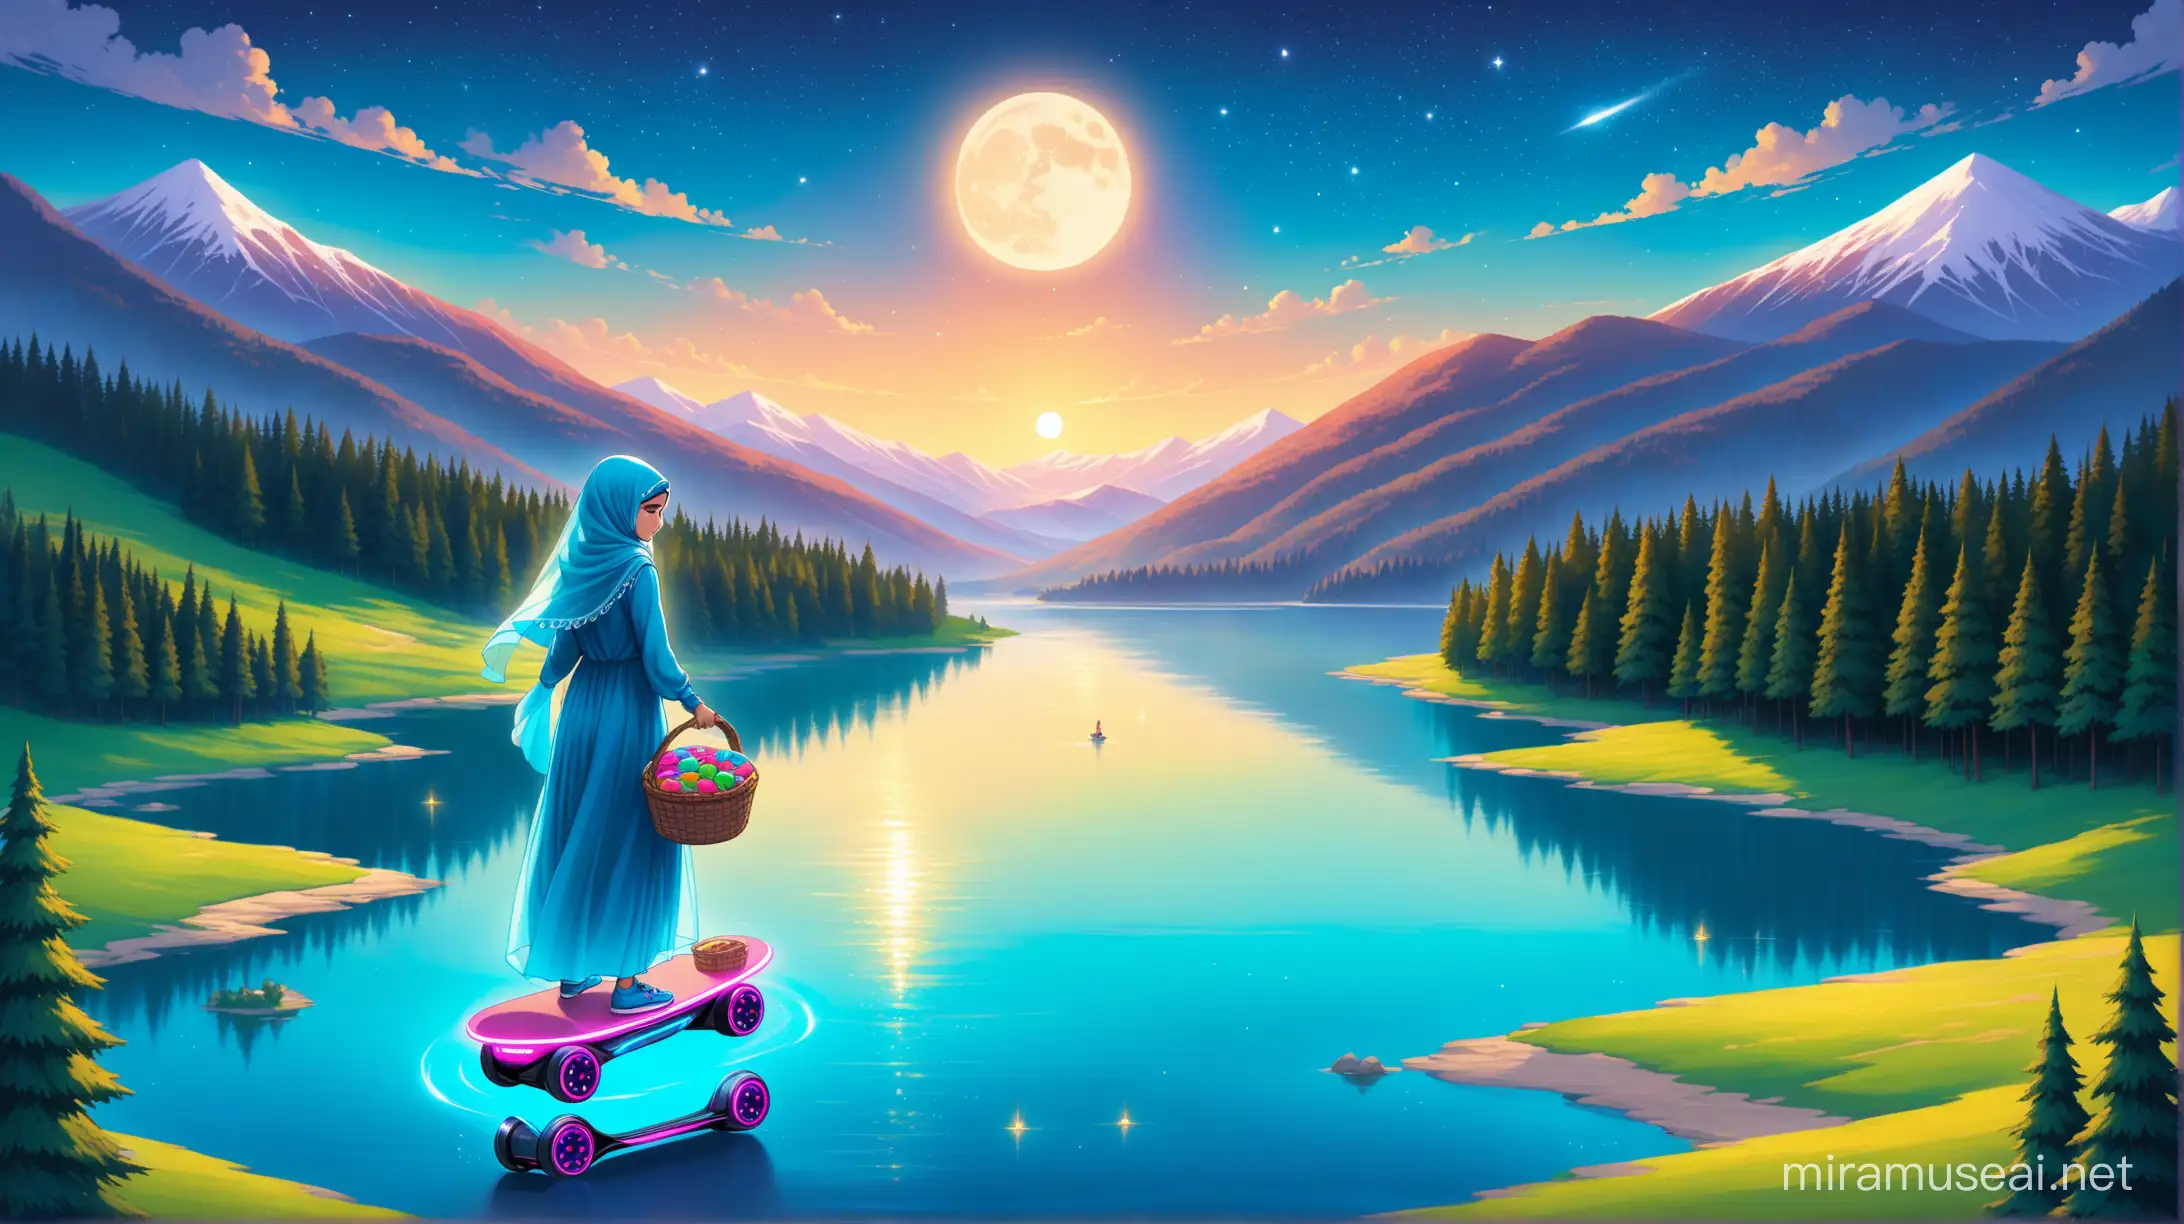 A veiled girl in a blue dress, her neck hidden, with a candy basket and Ramadan pita in her hand, is passing through a place with a view of forest, mountains, trees, lakes, hills and night on a hoverboard